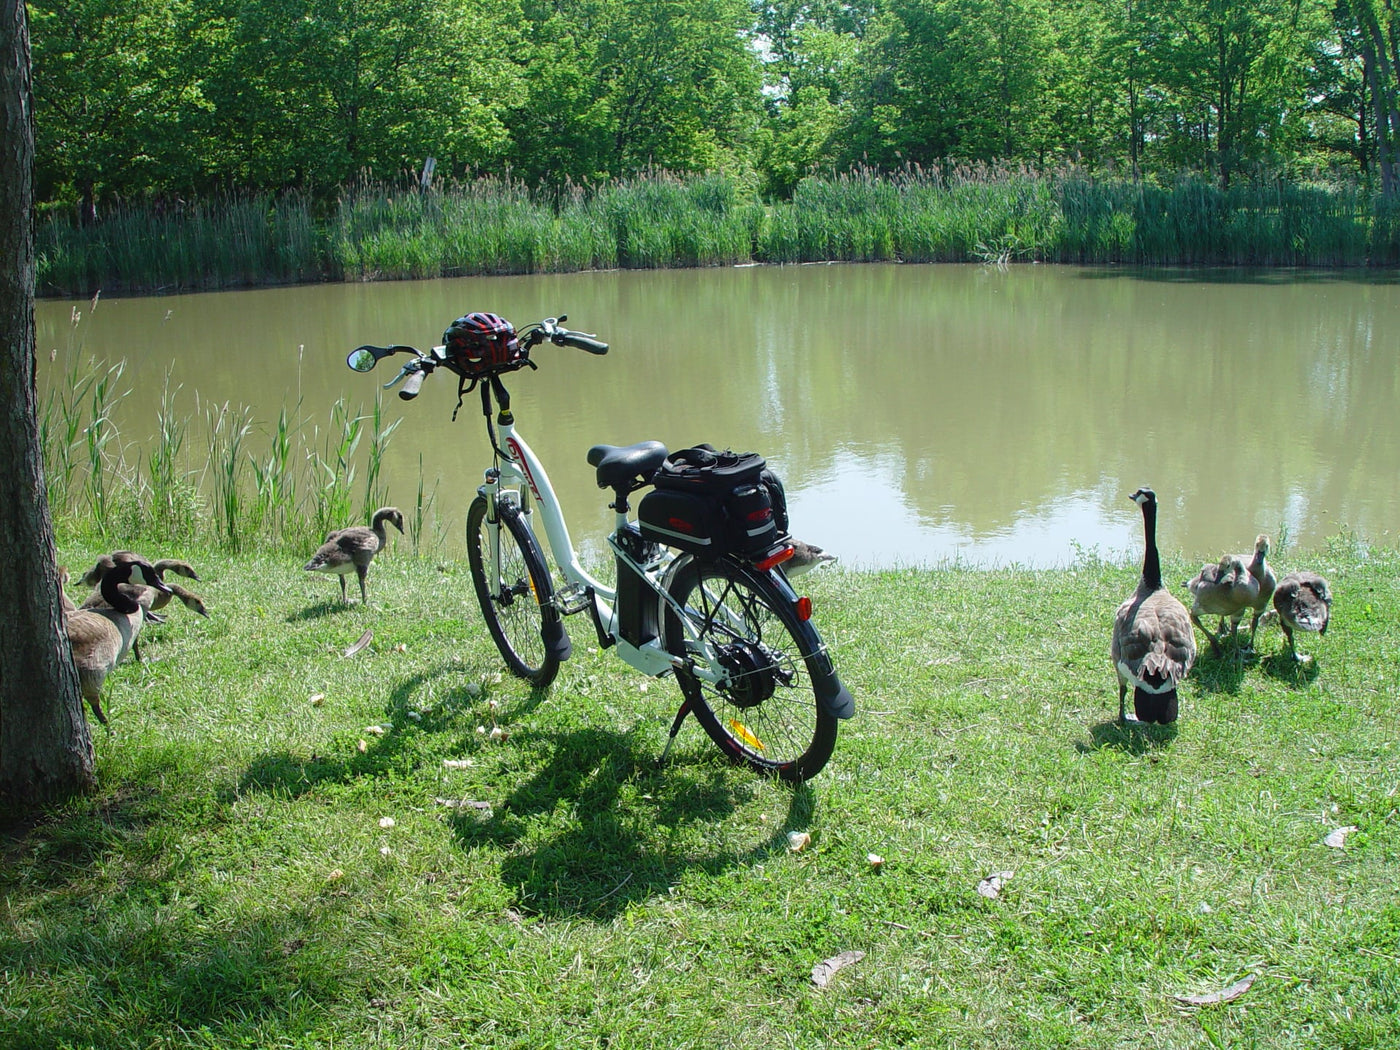 A DJ City Bike e-bike displayed with a gaggle of geese in front of a pond in a forested area